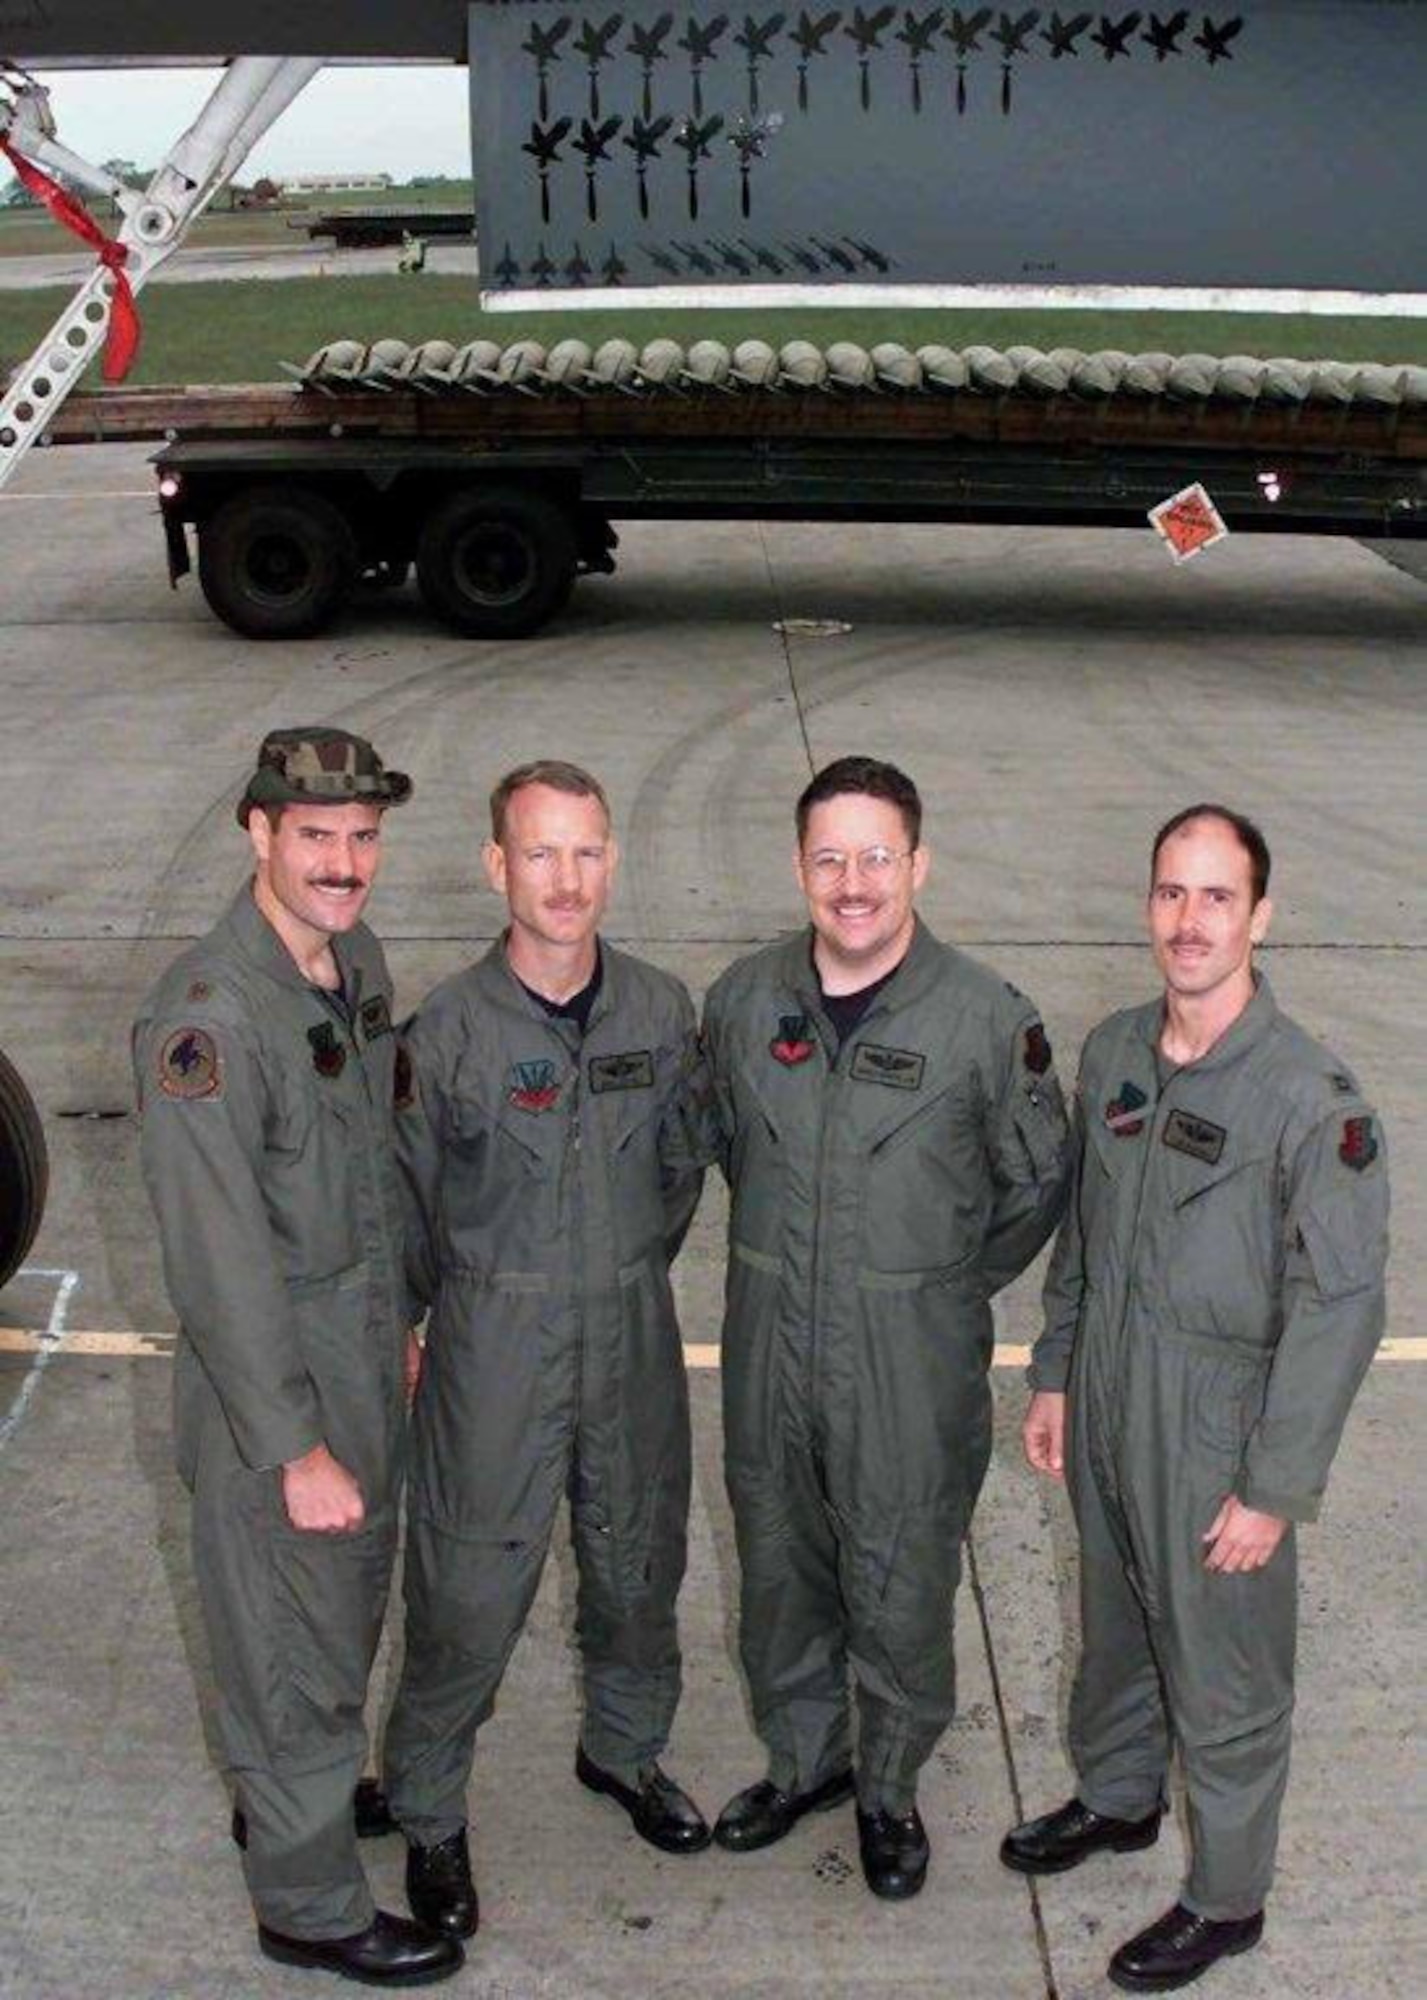 Ben Leitzel (second from left), father of Captain Erik Leitzel, a pilot assigned to the 393rd Bomb Squadron at Whiteman Air Force Base, Missouri, poses for a photo with his crew before a mission in 1999. The retired colonel flew 16 B-1 combat sorties During Operation Allied Force out of Royal Air Force Fairford, where his own son would later serve. Erik Leitzel continued his family's aviator legacy when he became a third-generation bomber pilot, flying the B-2 Spirit, the U.S. Air Force's premier stealth bomber. (Courtesy photo)